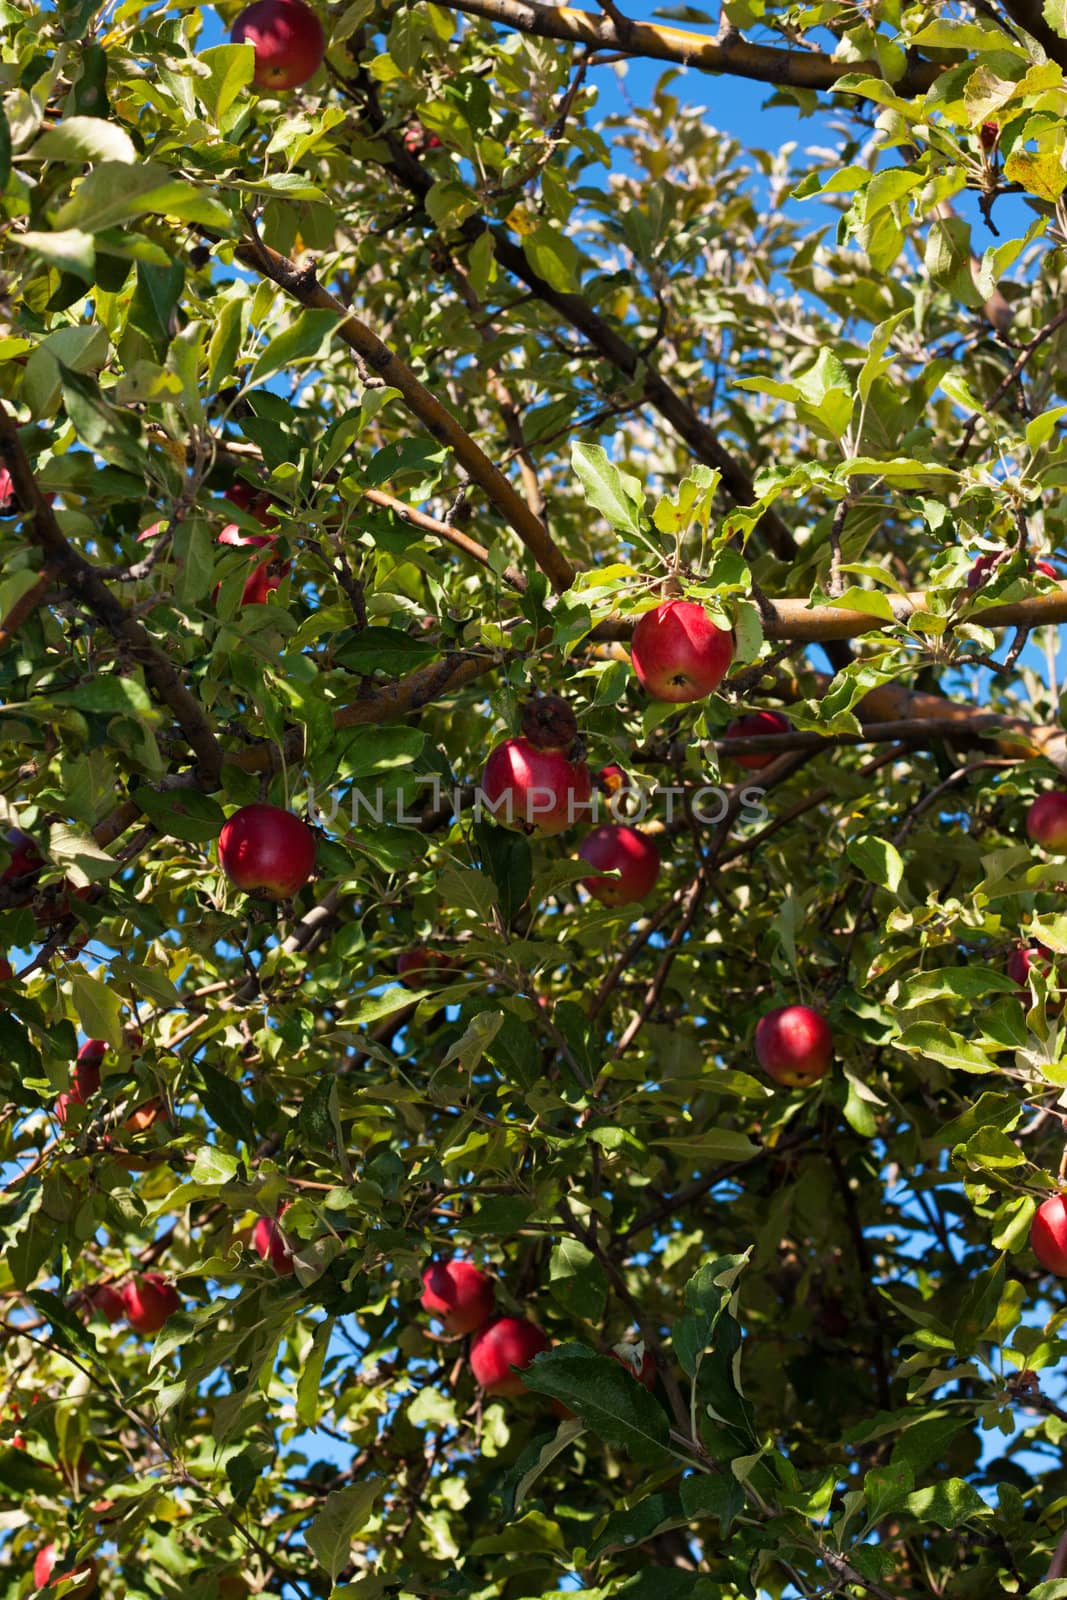 Some ripe red apples on a branch